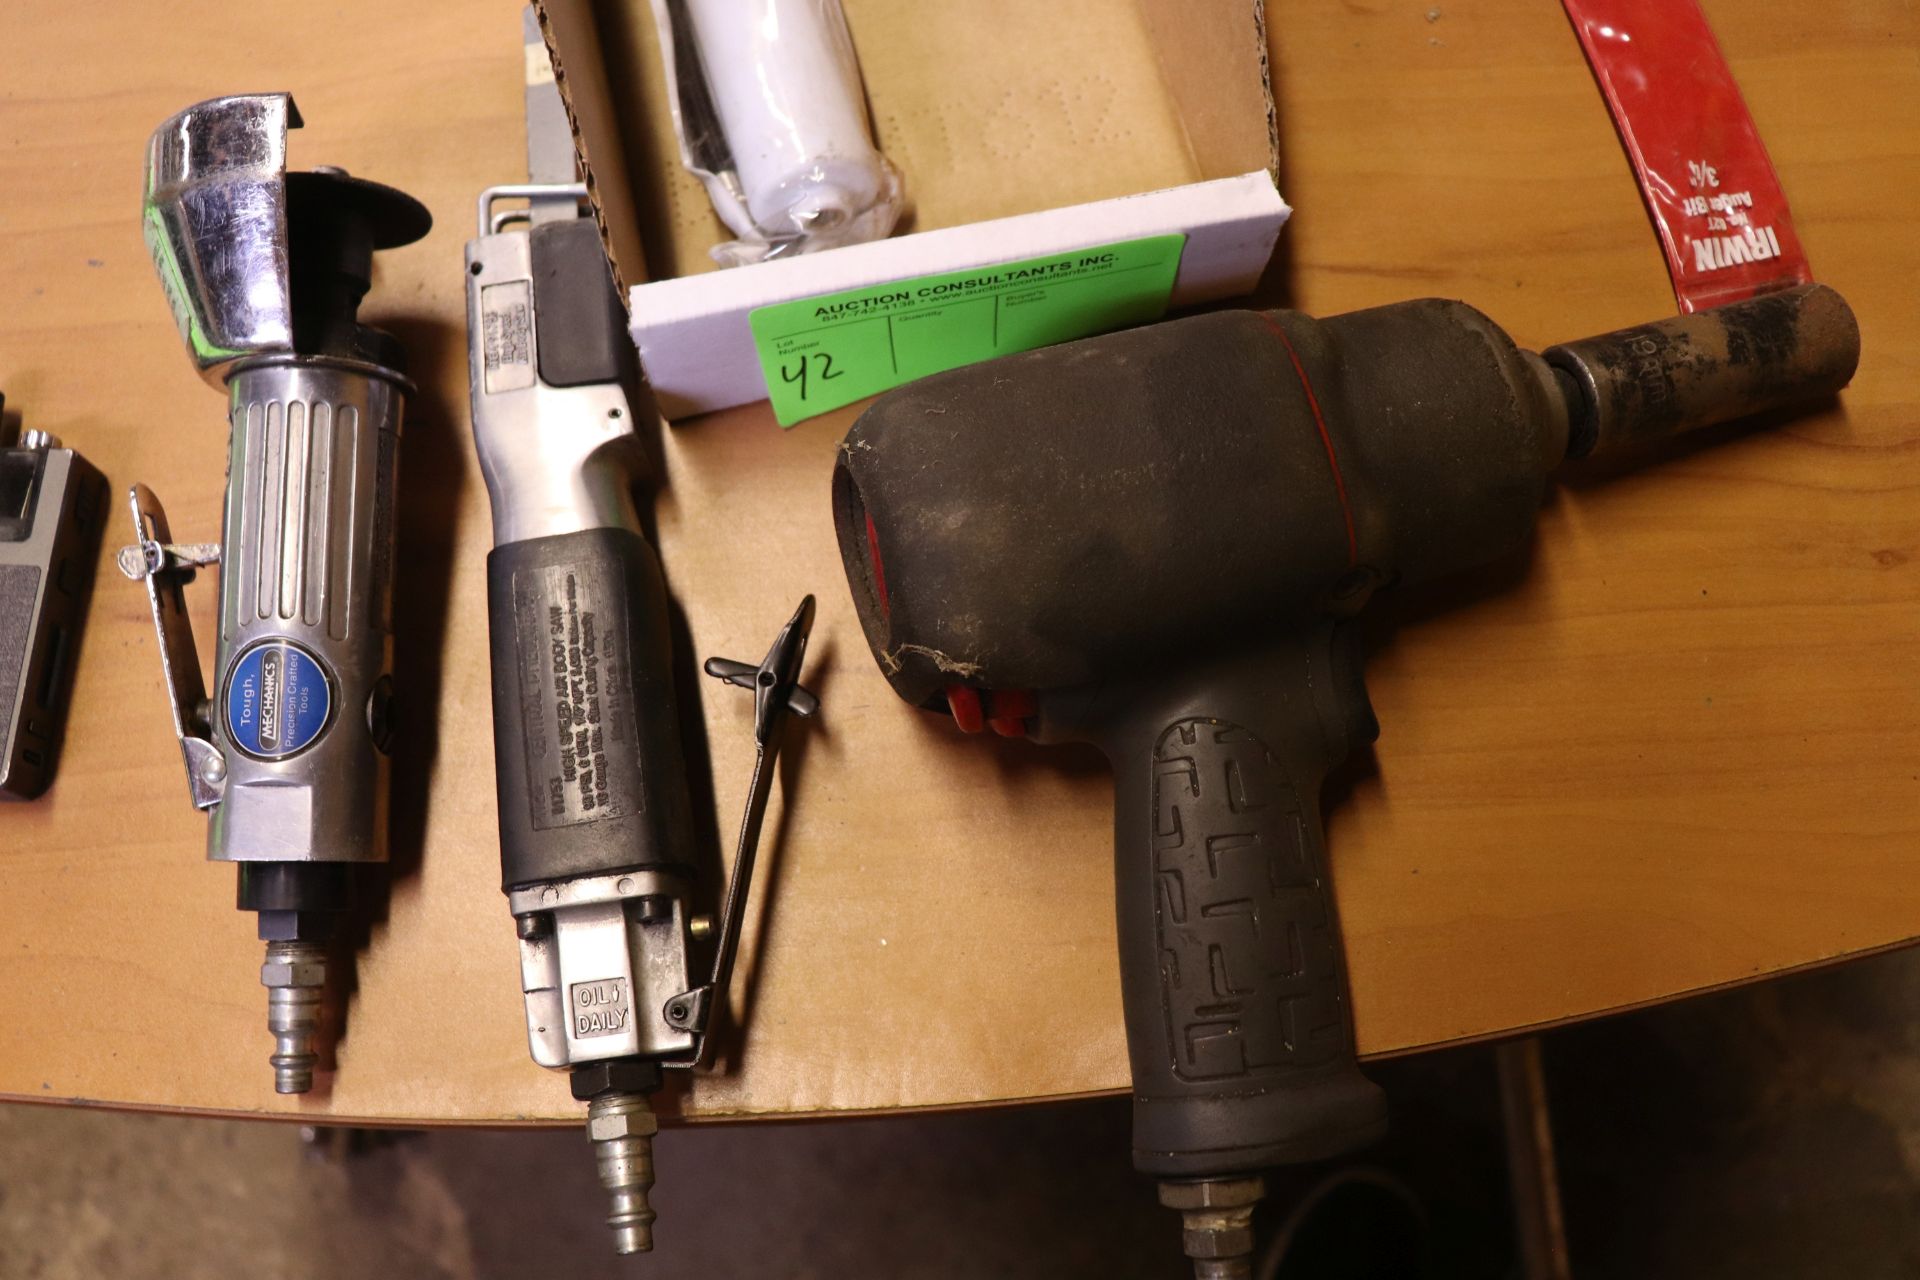 Pneumatic impact wrench, Central pneumatic high speed air body saw, and a Tough Mechanics pneumatic